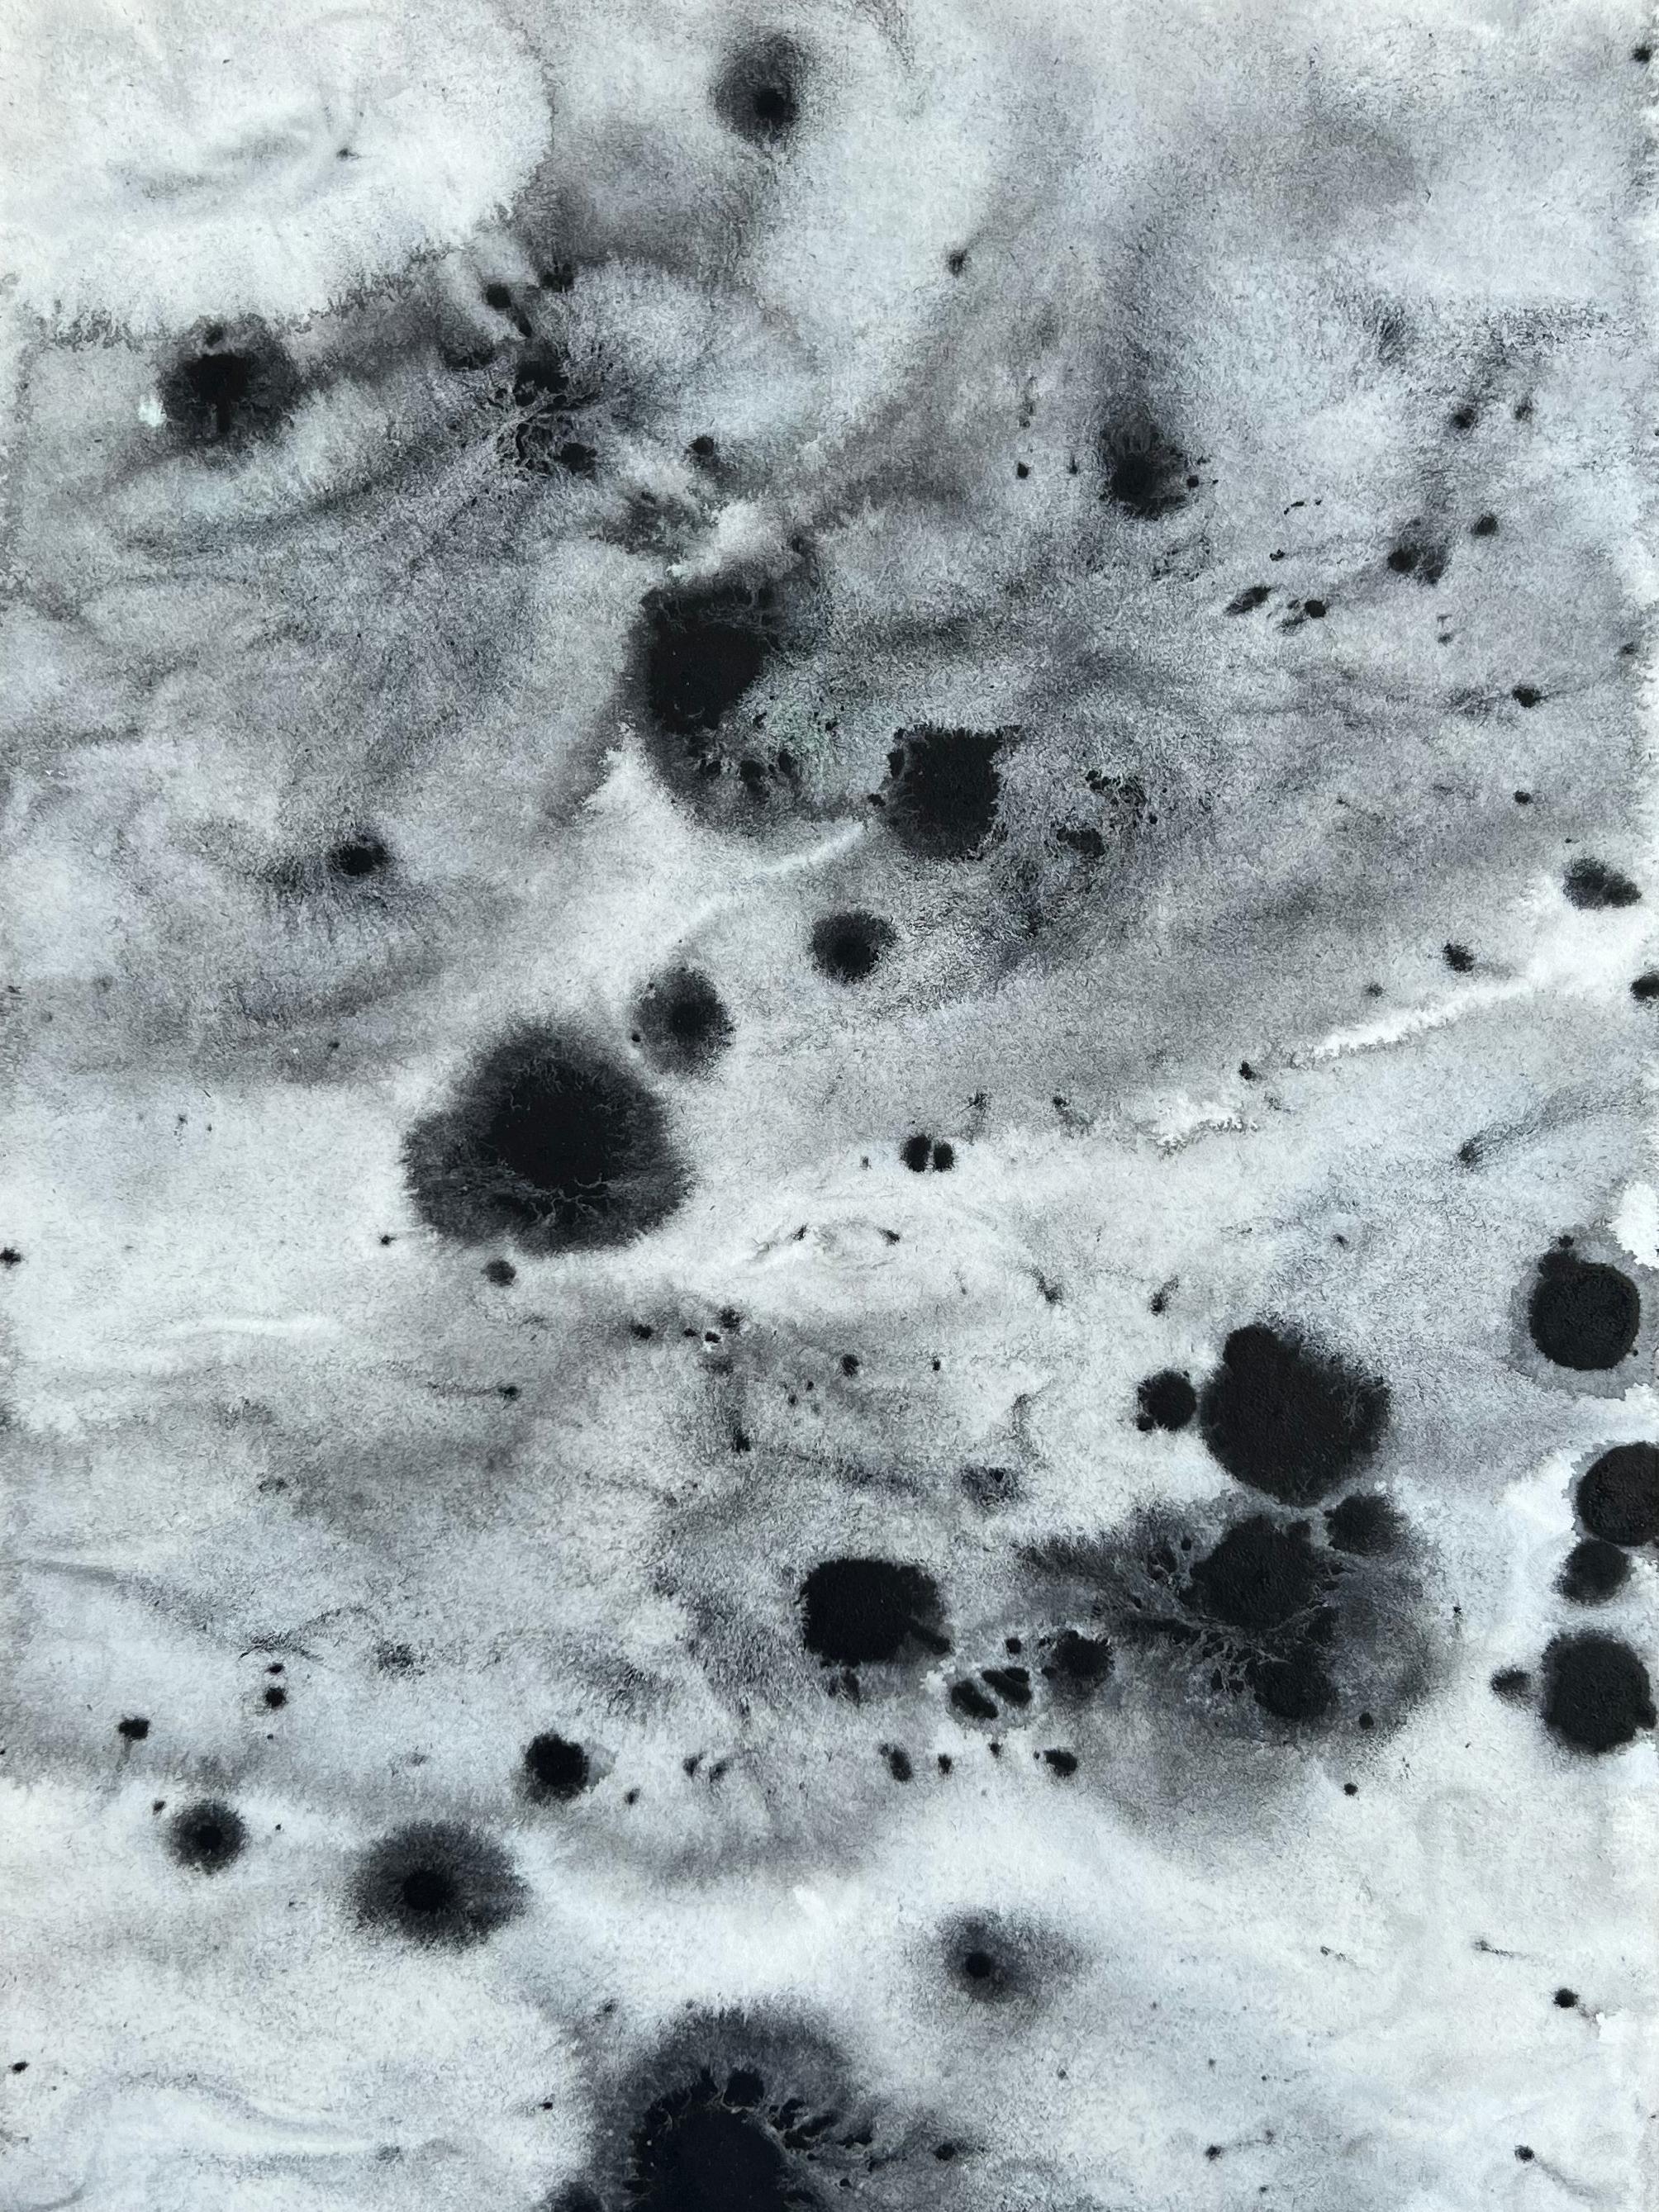 TUSET Abstract Drawing - Totally black Expressionist Landscape on Paper, 30 x 40 cm, Painting.